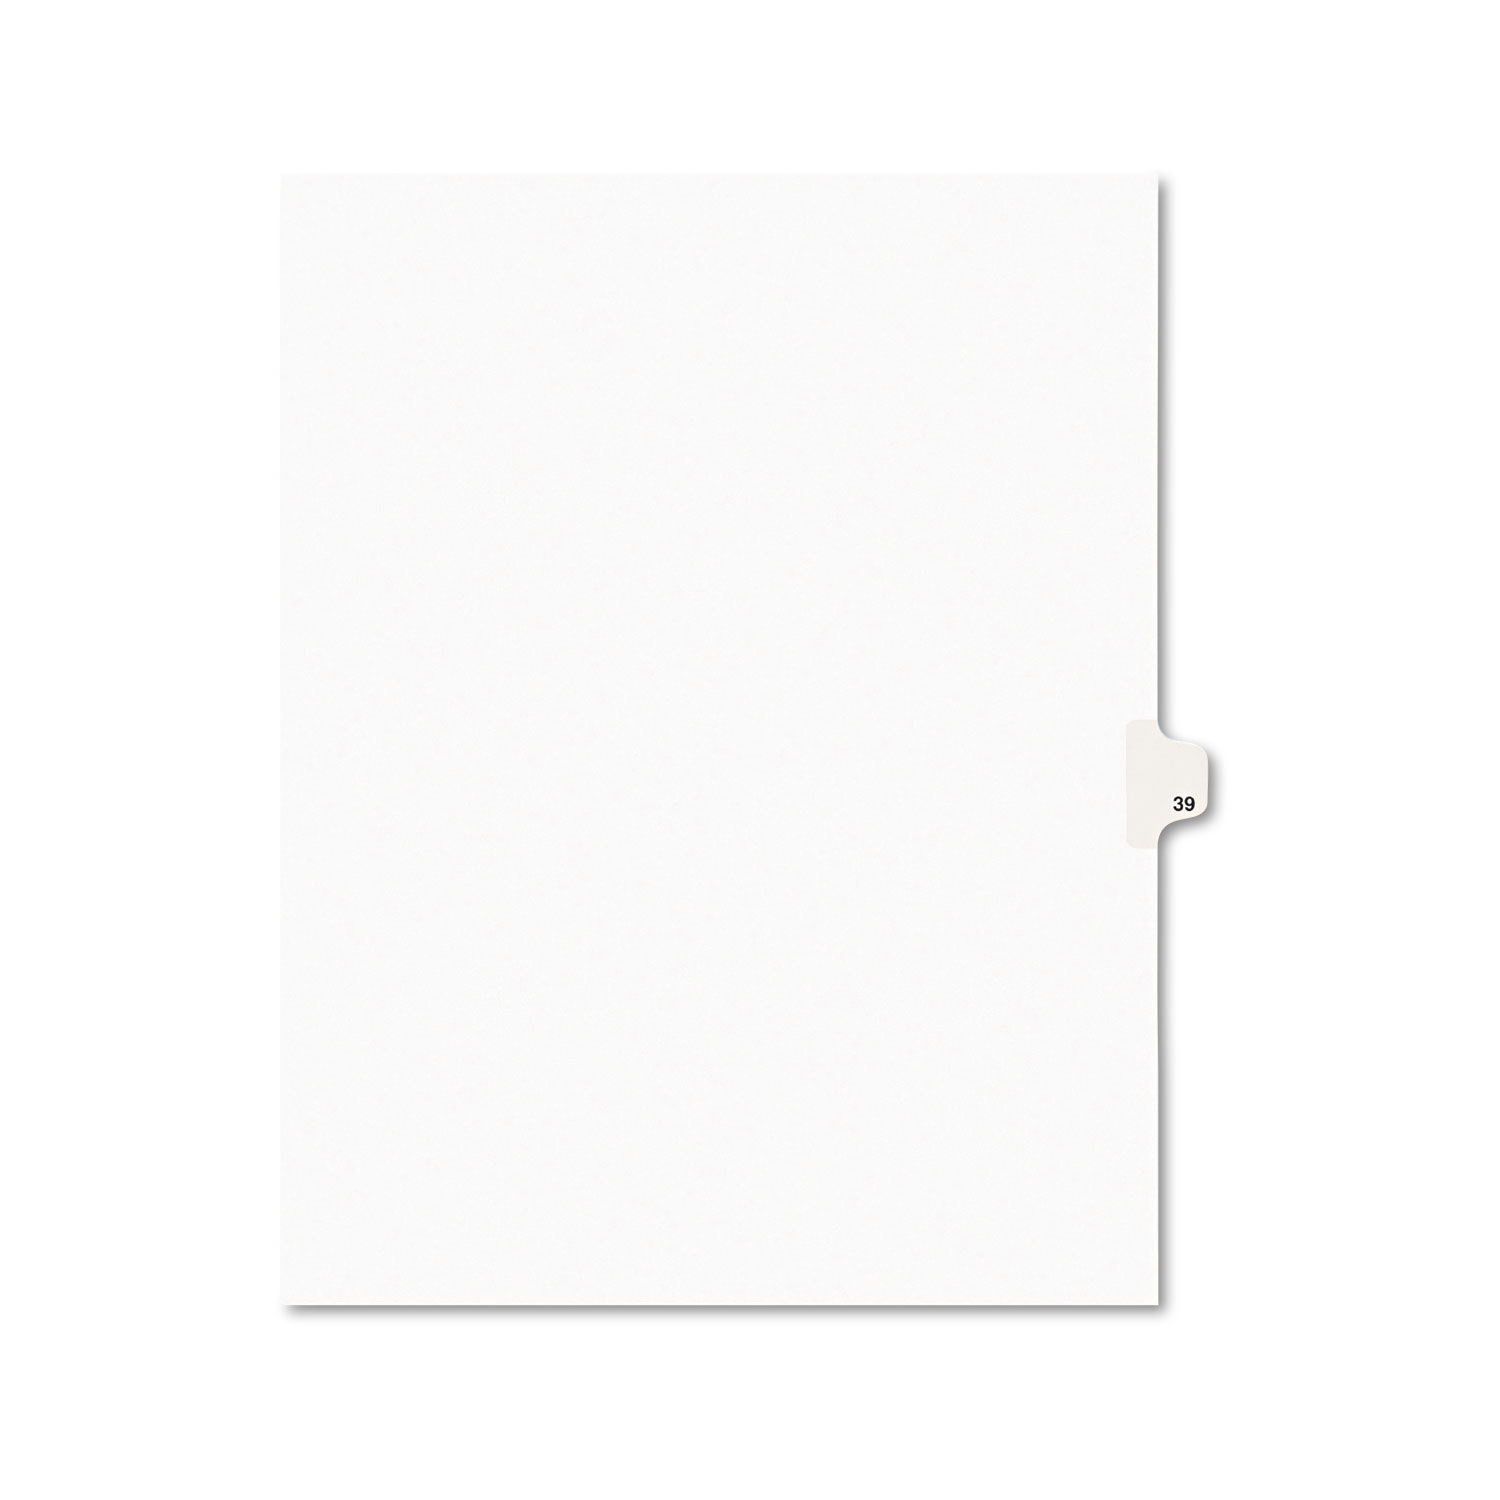  Avery 01039 Preprinted Legal Exhibit Side Tab Index Dividers, Avery Style, 10-Tab, 39, 11 x 8.5, White, 25/Pack (AVE01039) 